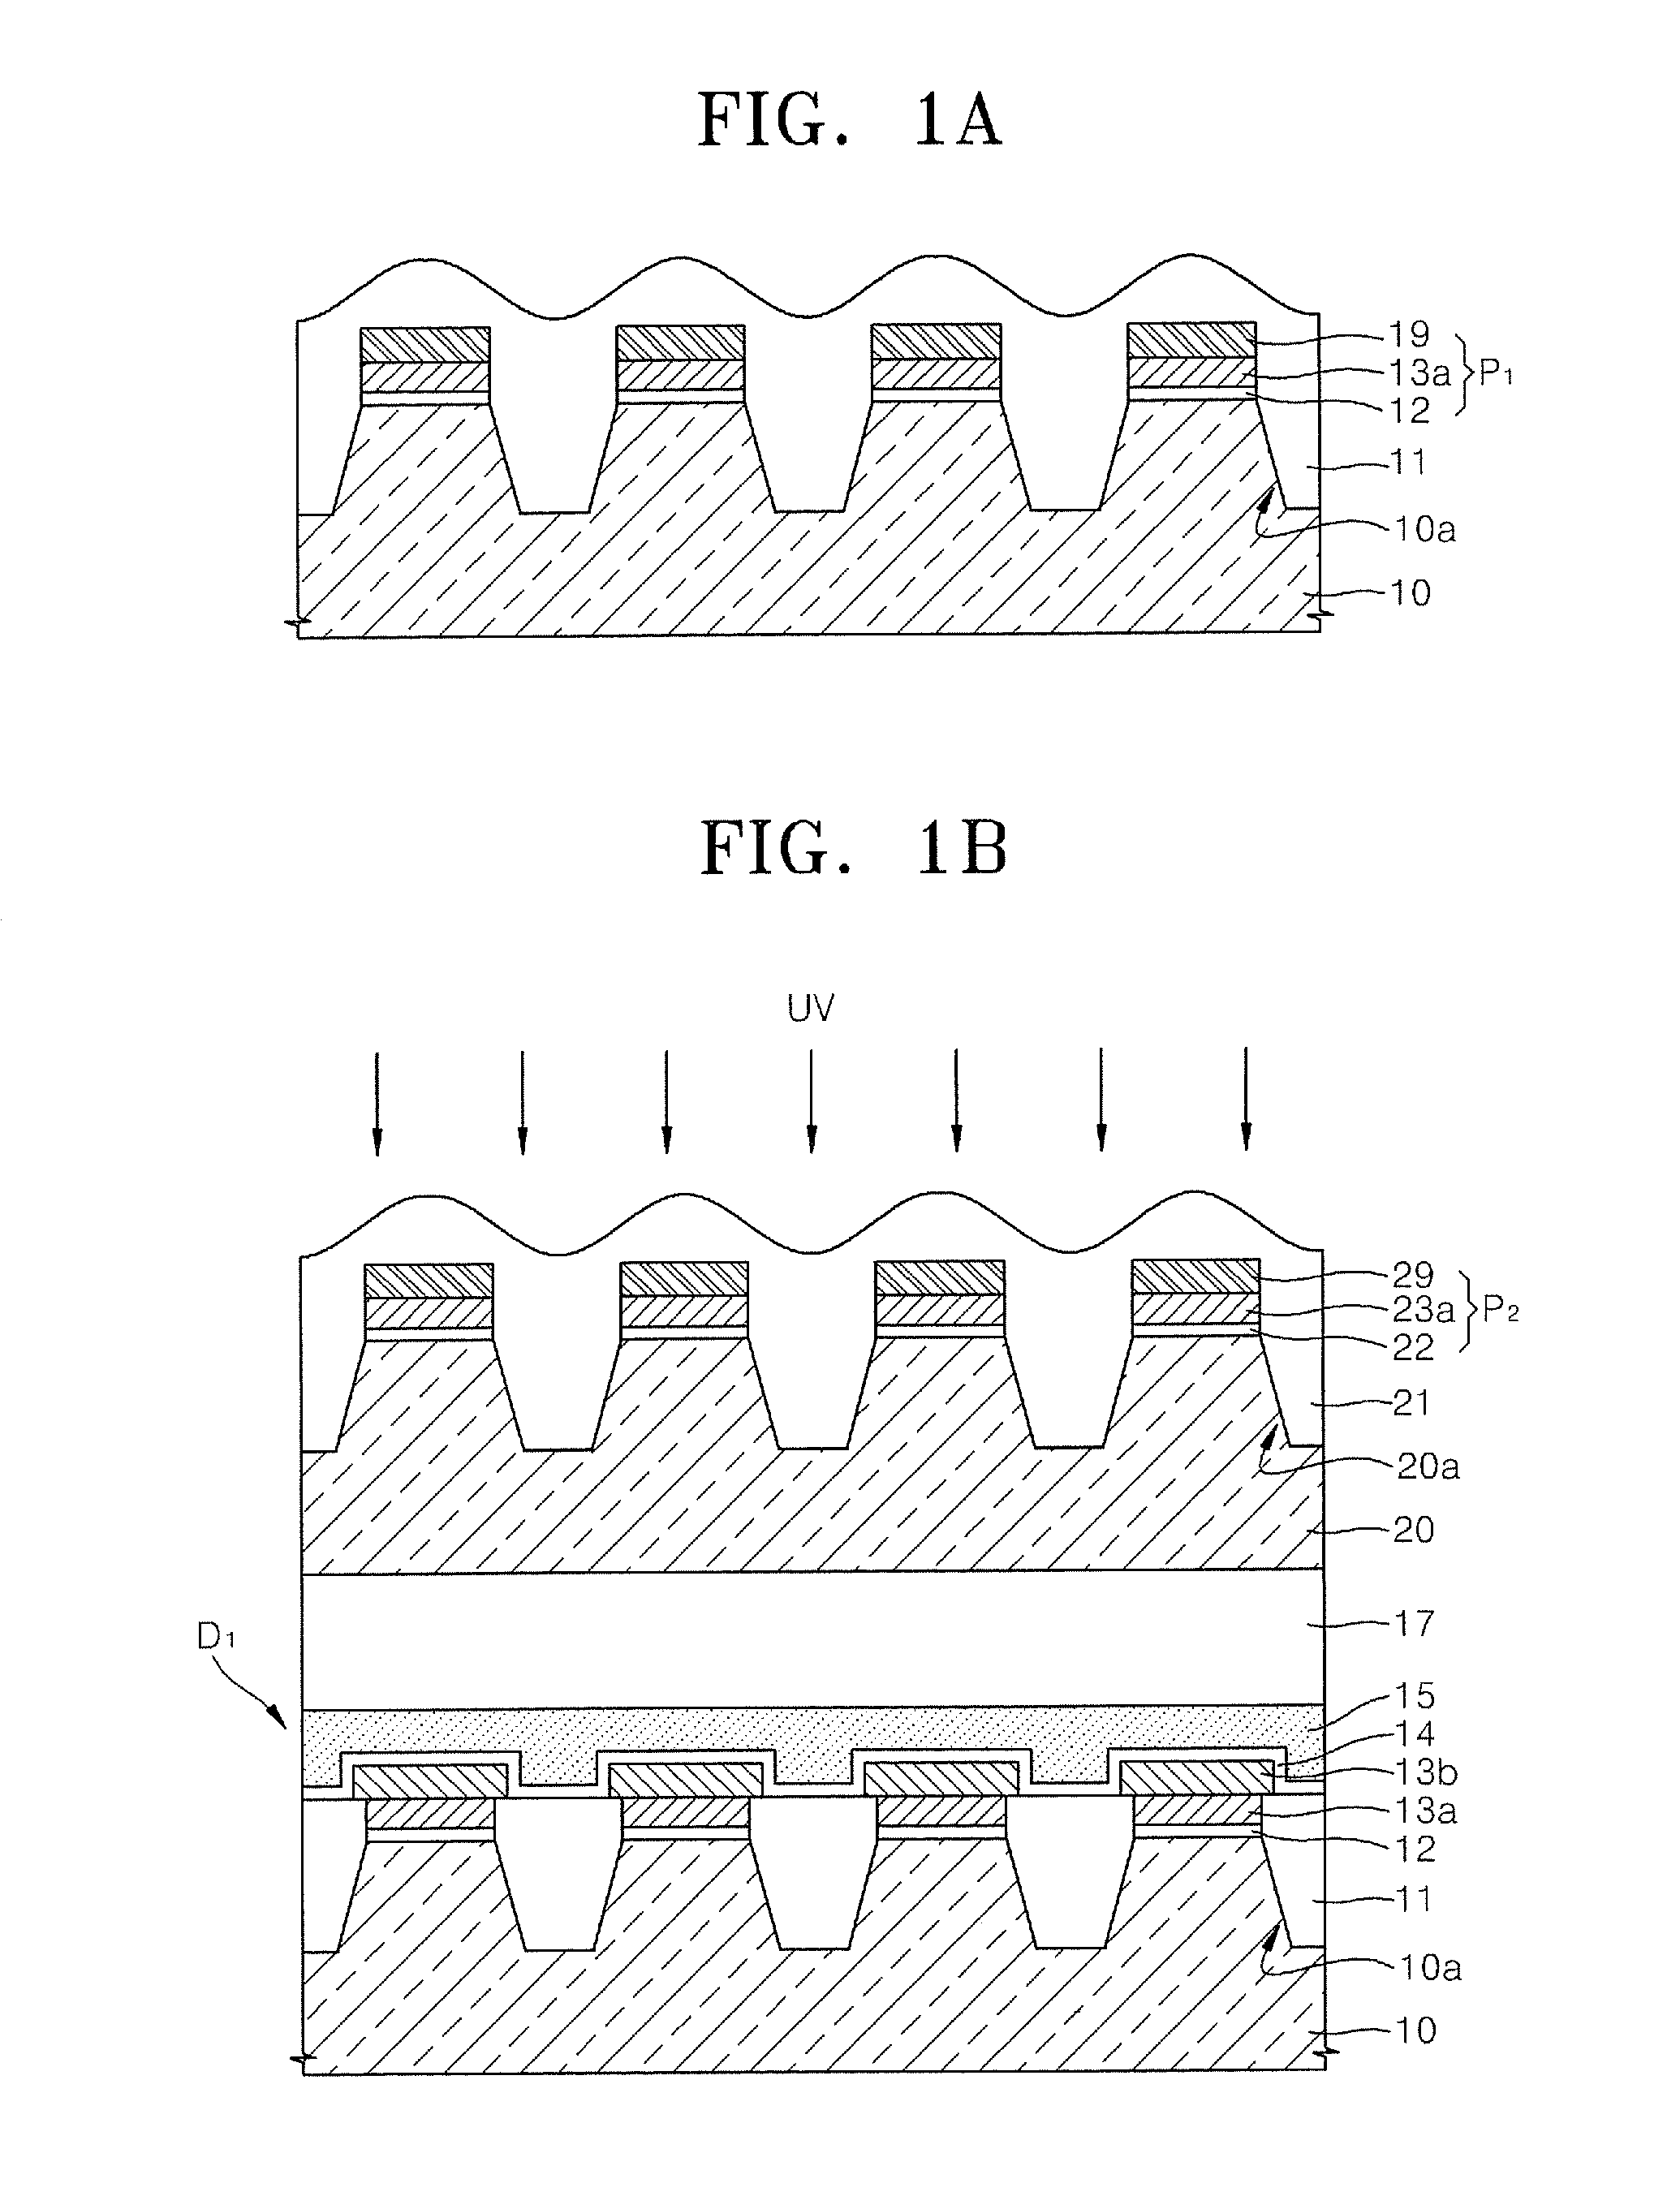 Methods of reducing impurity concentration in isolating films in semiconductor devices